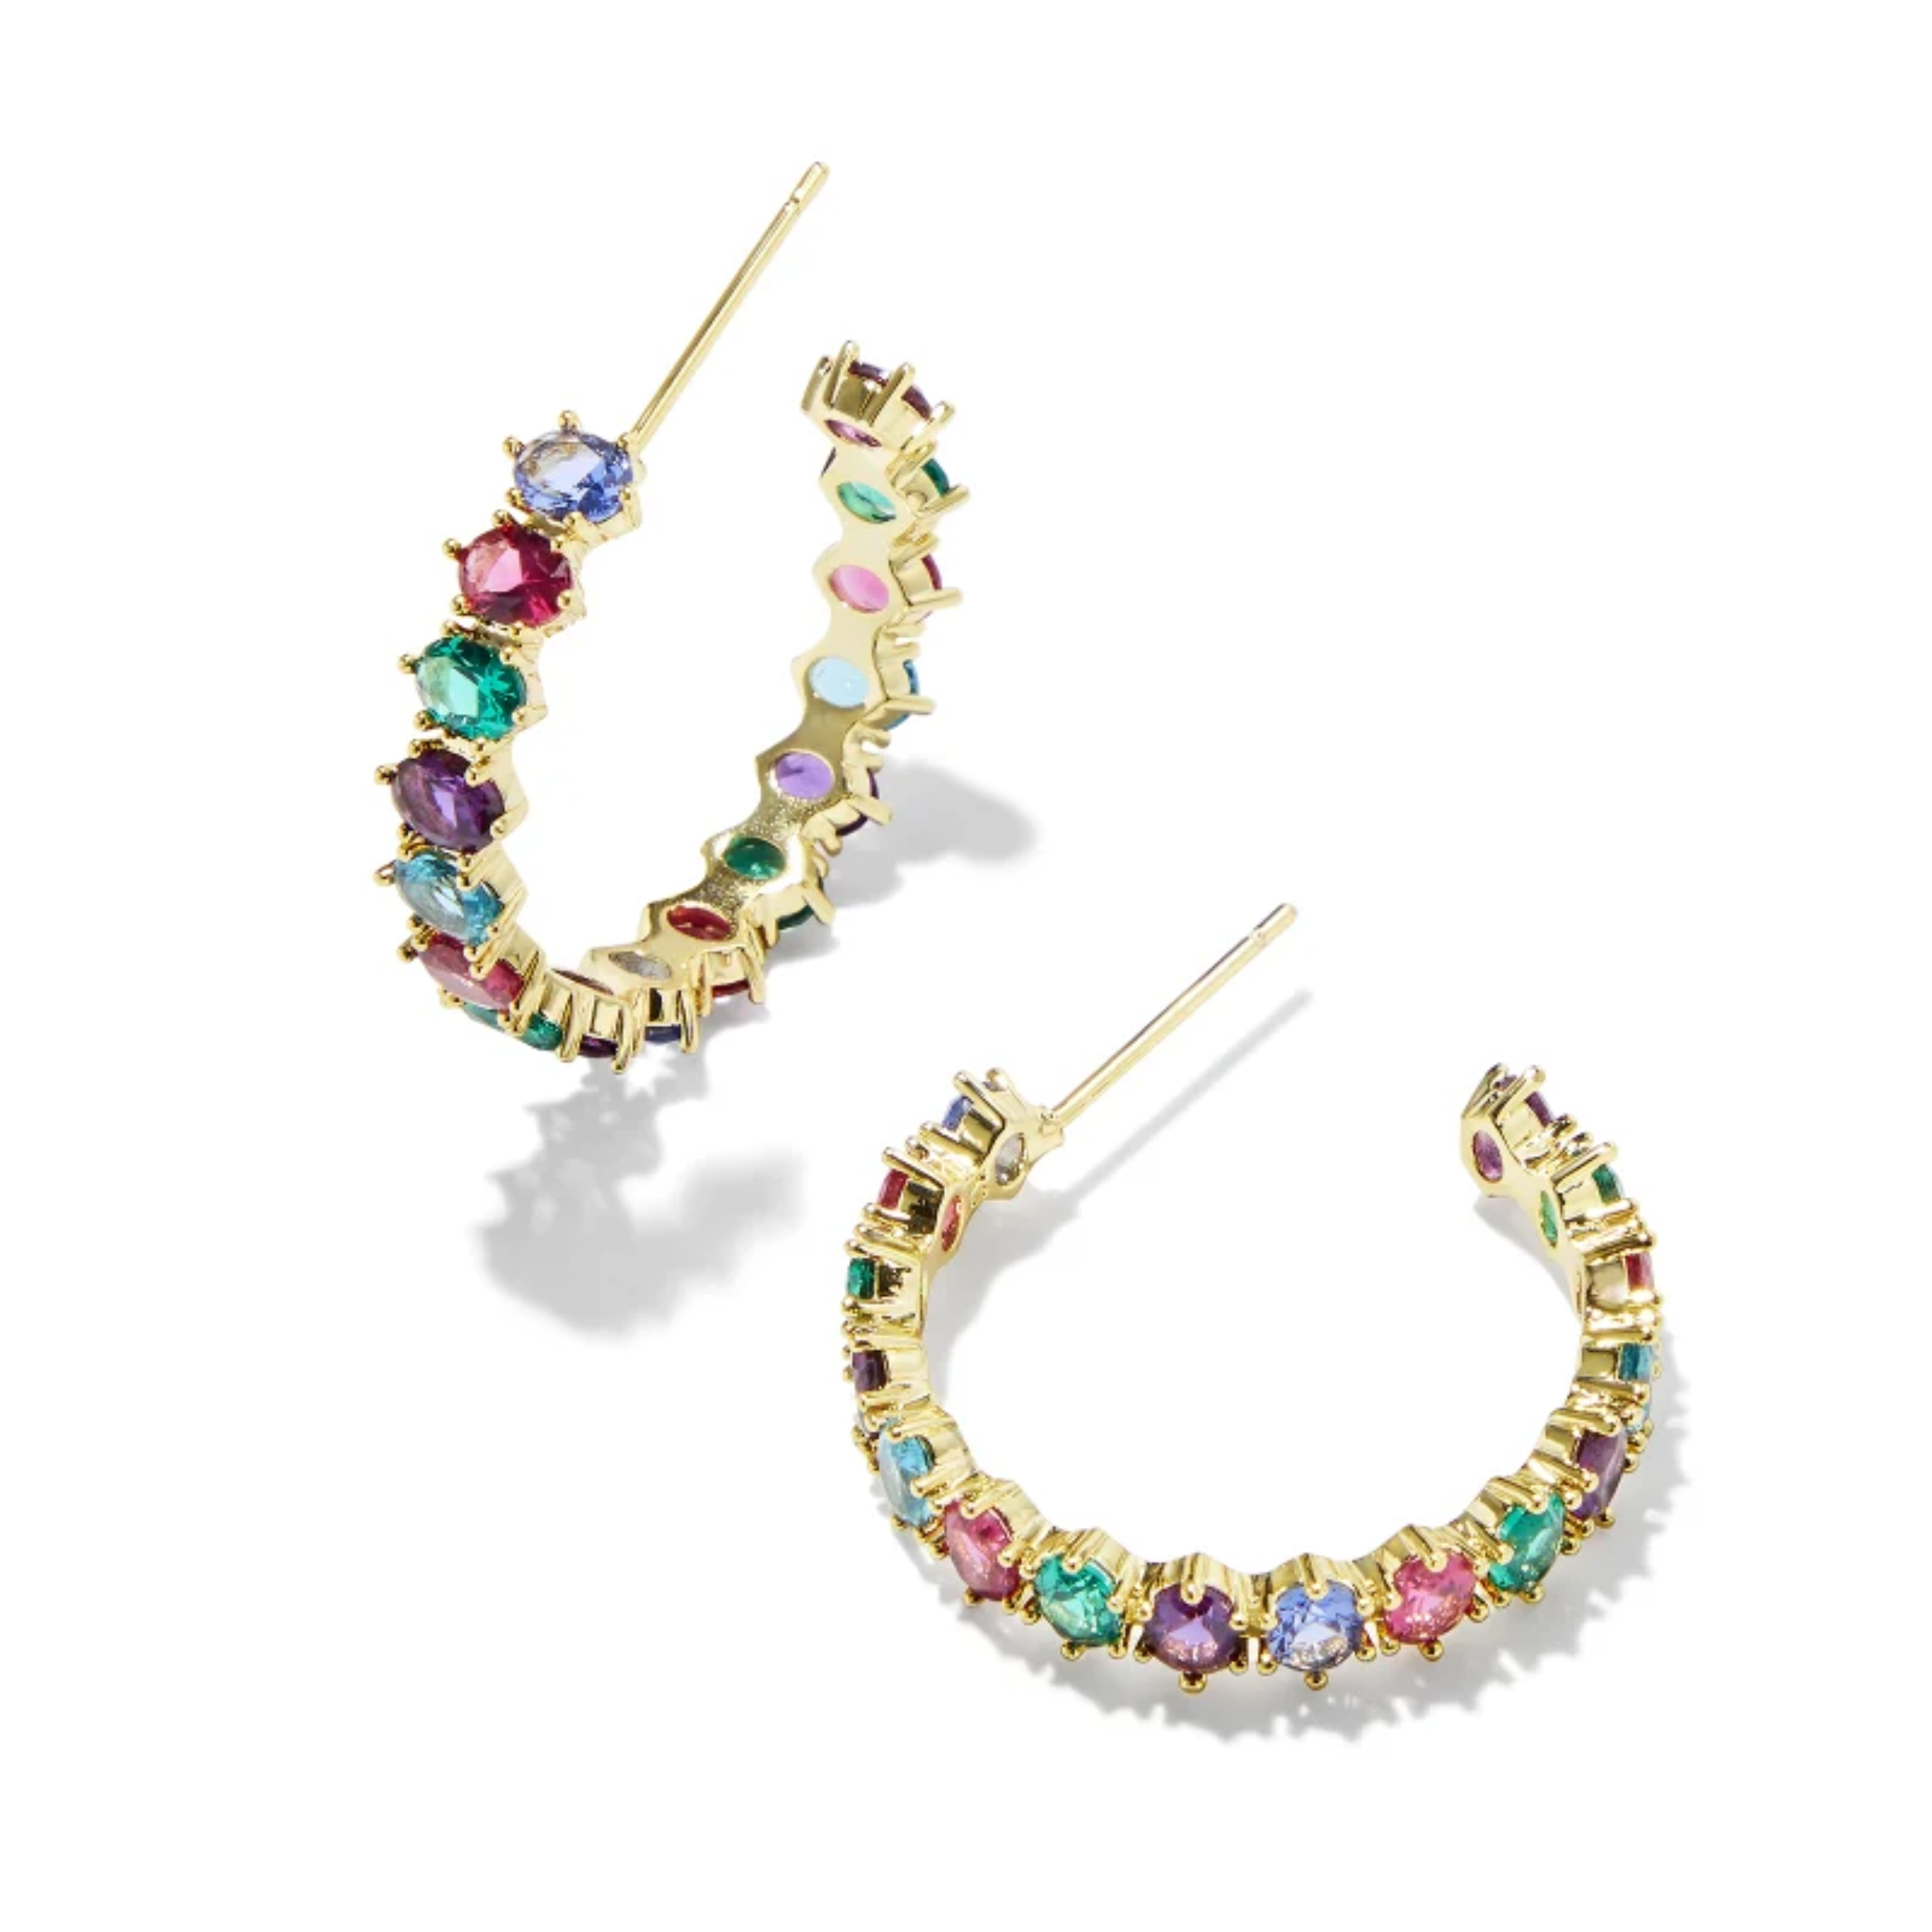 These Cailin Gold Crystal Hoop earrings in Multi Mix by Kendra Scott are pictured on a white background.